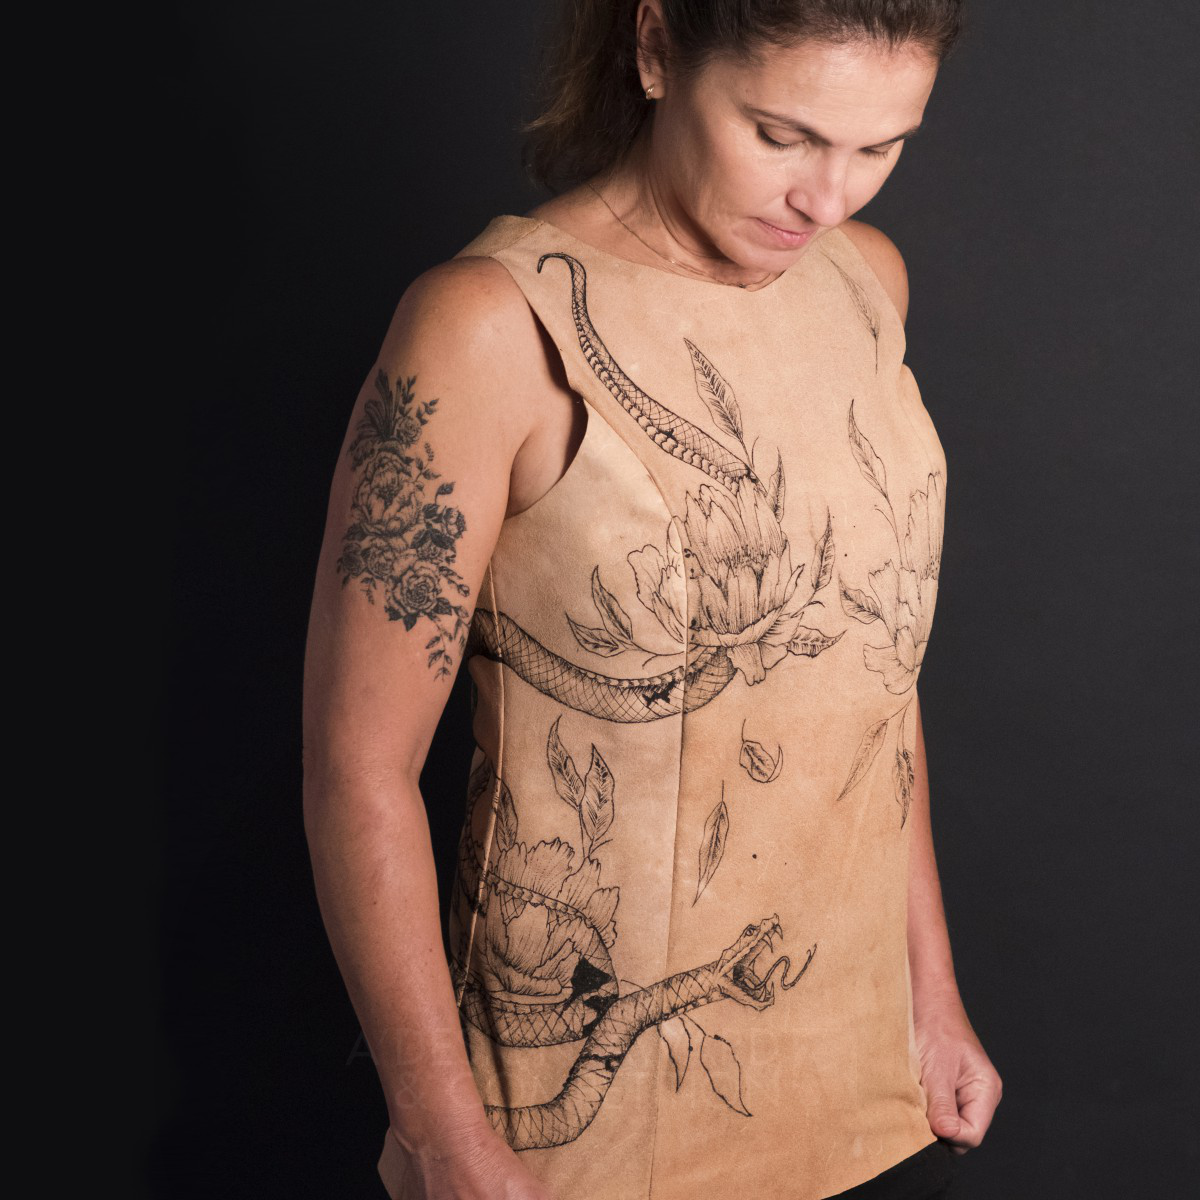 Inked: A Vest That Simulates a Tattooed Body